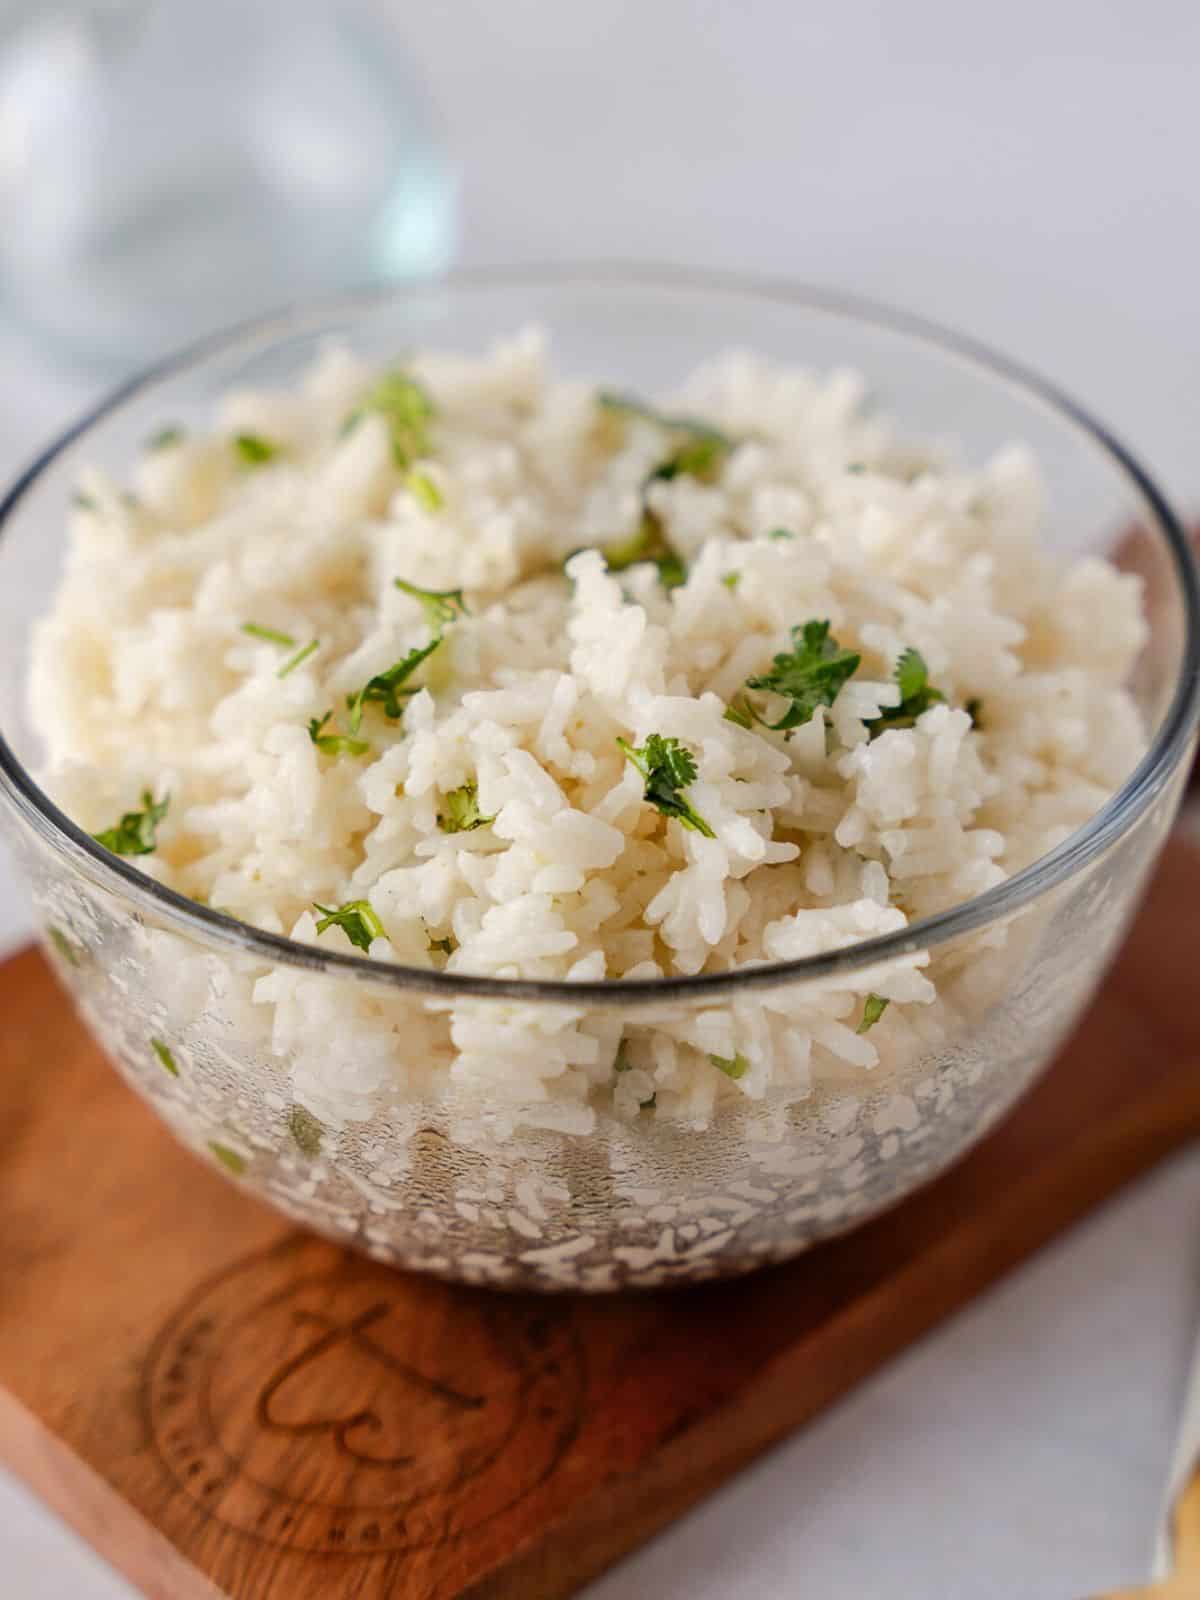 Coconut rice in a glass bowl on a small wooden board.